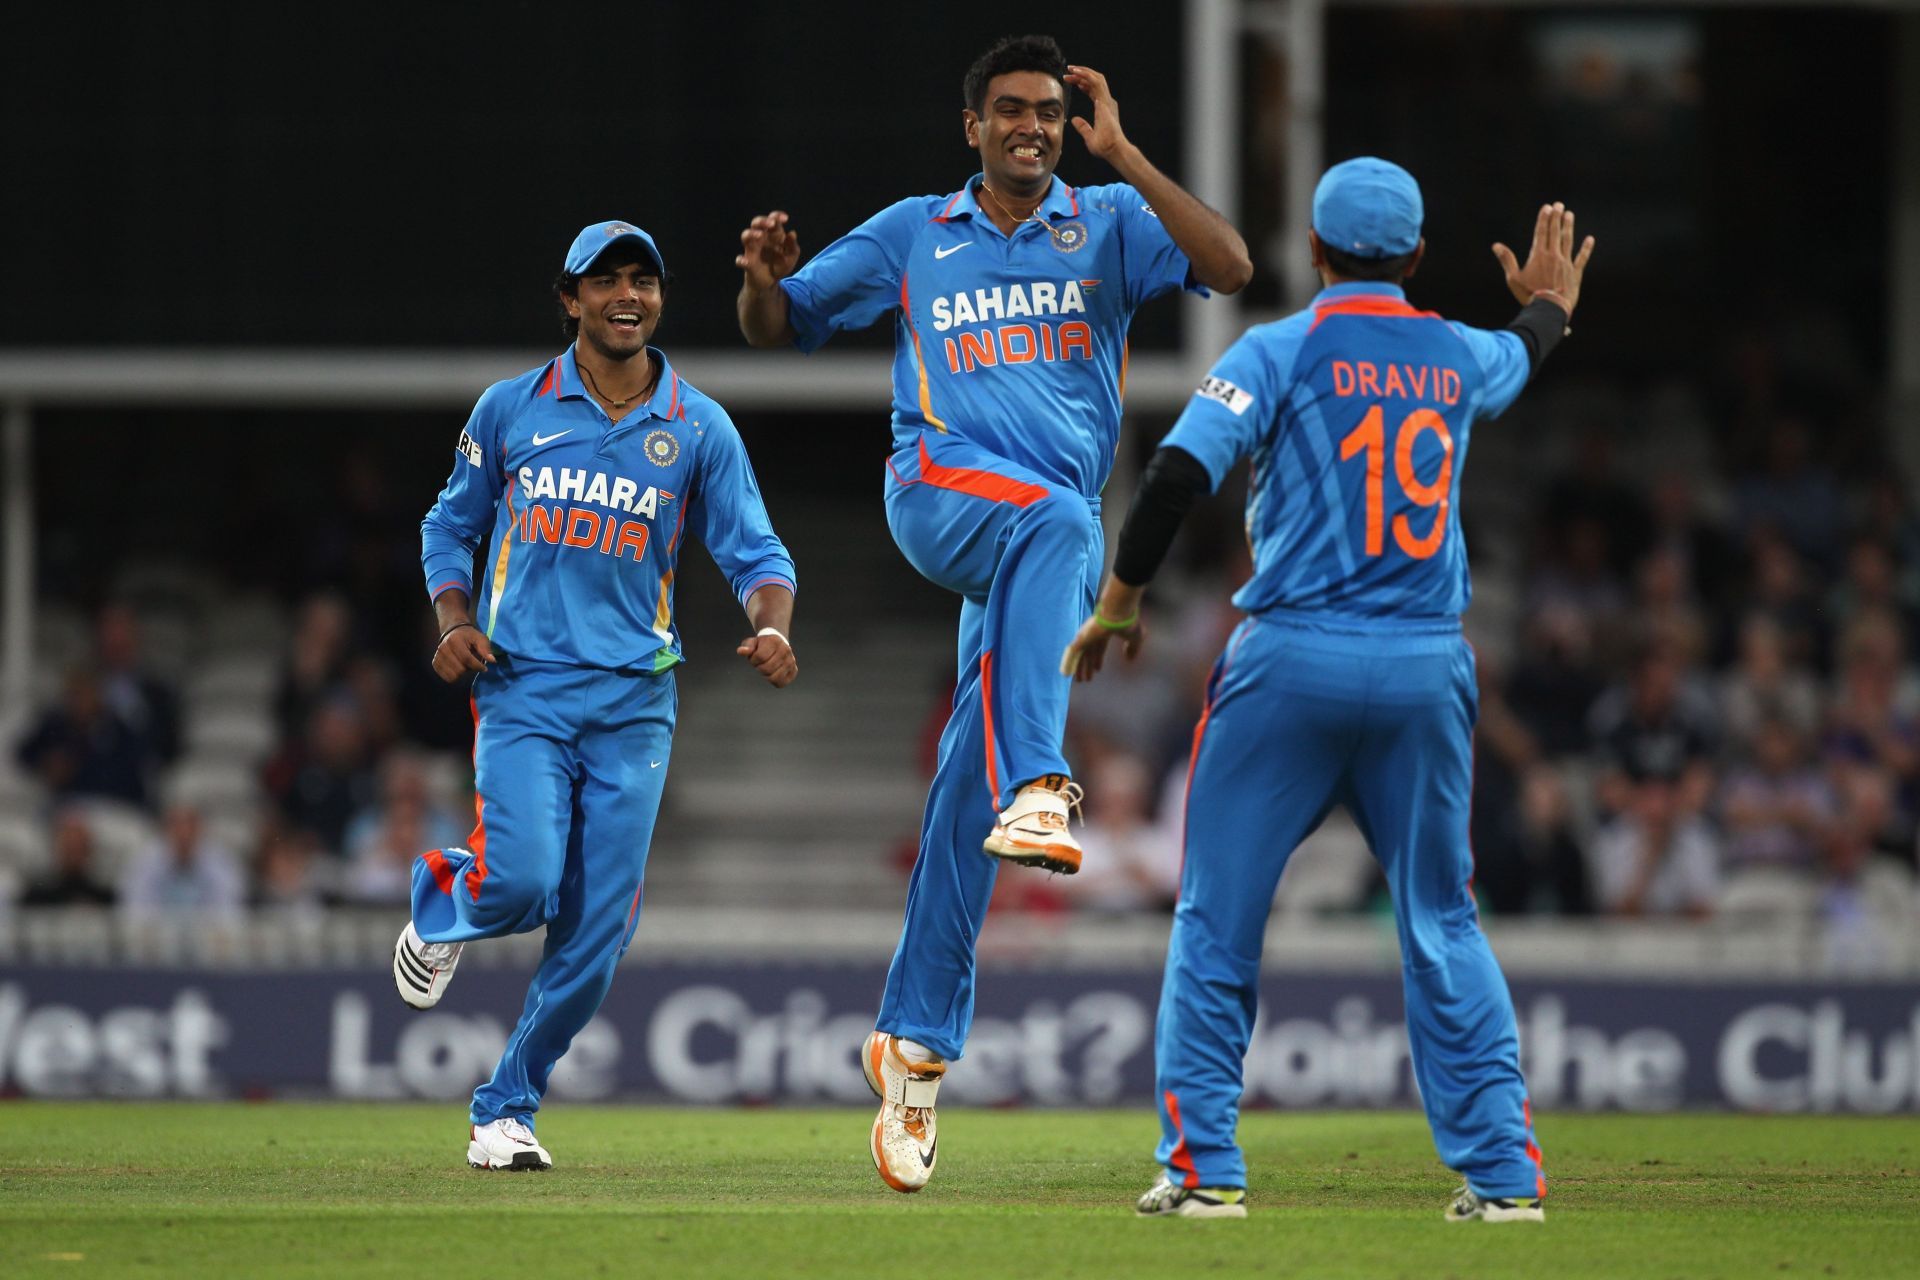 England v India - 3rd Natwest One Day International Series (Image: Getty)